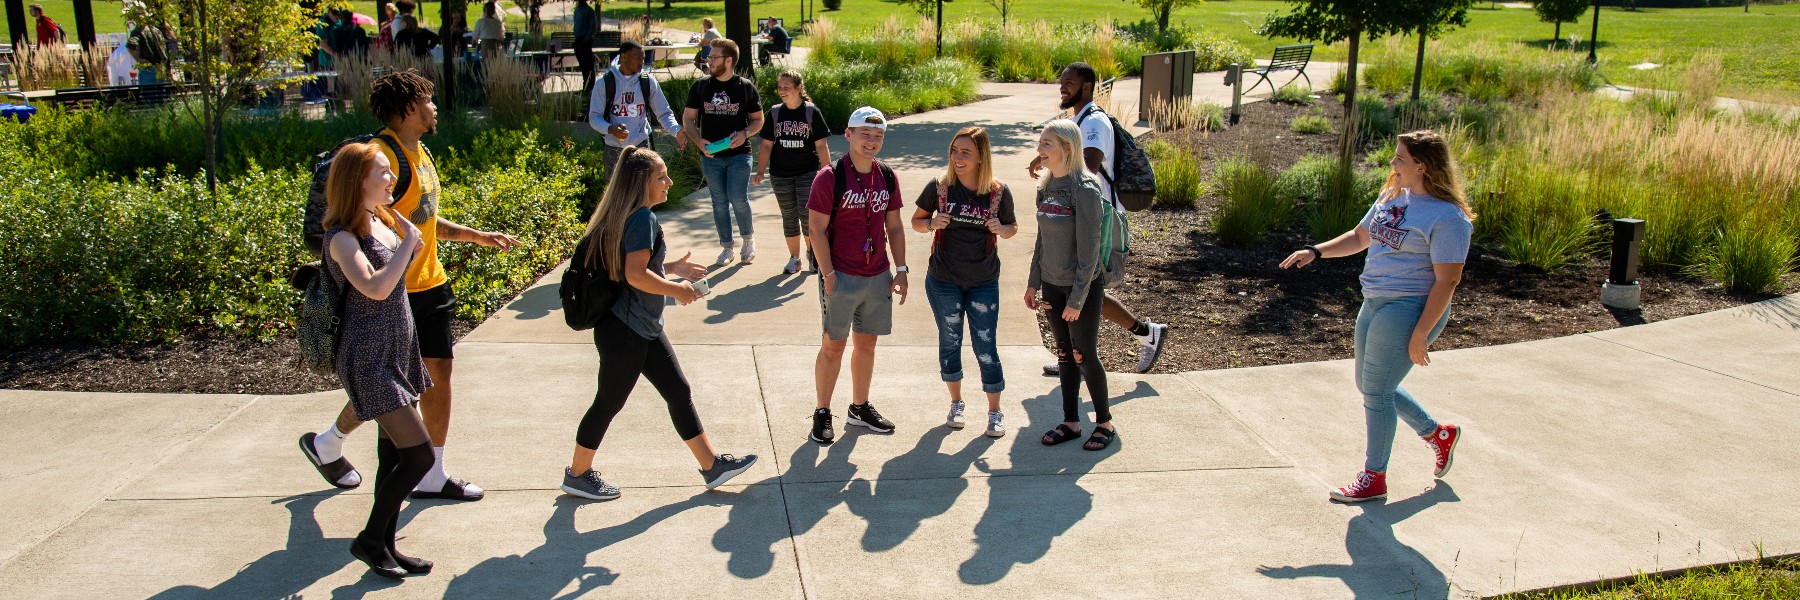 Students gathering, socializing, and crossing paths with other IU East students.